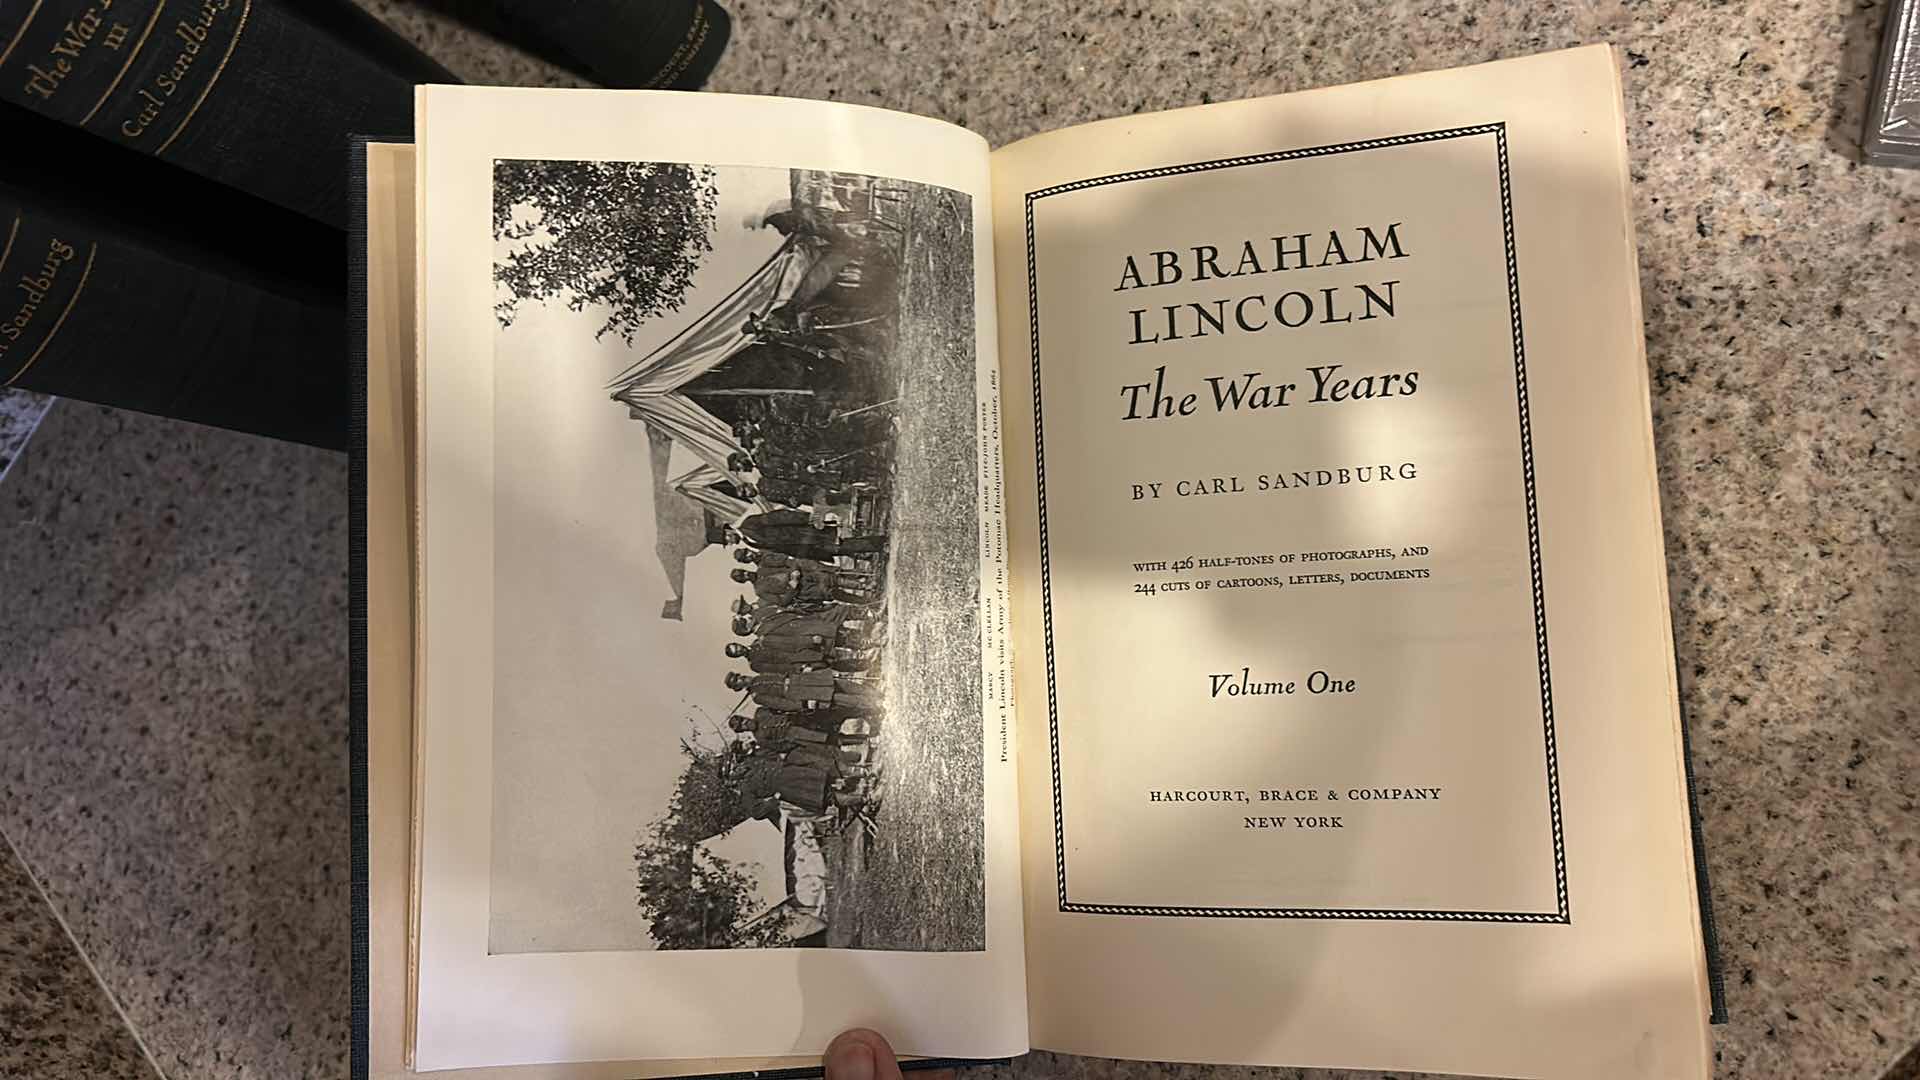 Photo 3 of 4 HARDCOVER BOOKS ABRAHAM LINCOLN THE WAR YEARS BY CARL SANDBURG